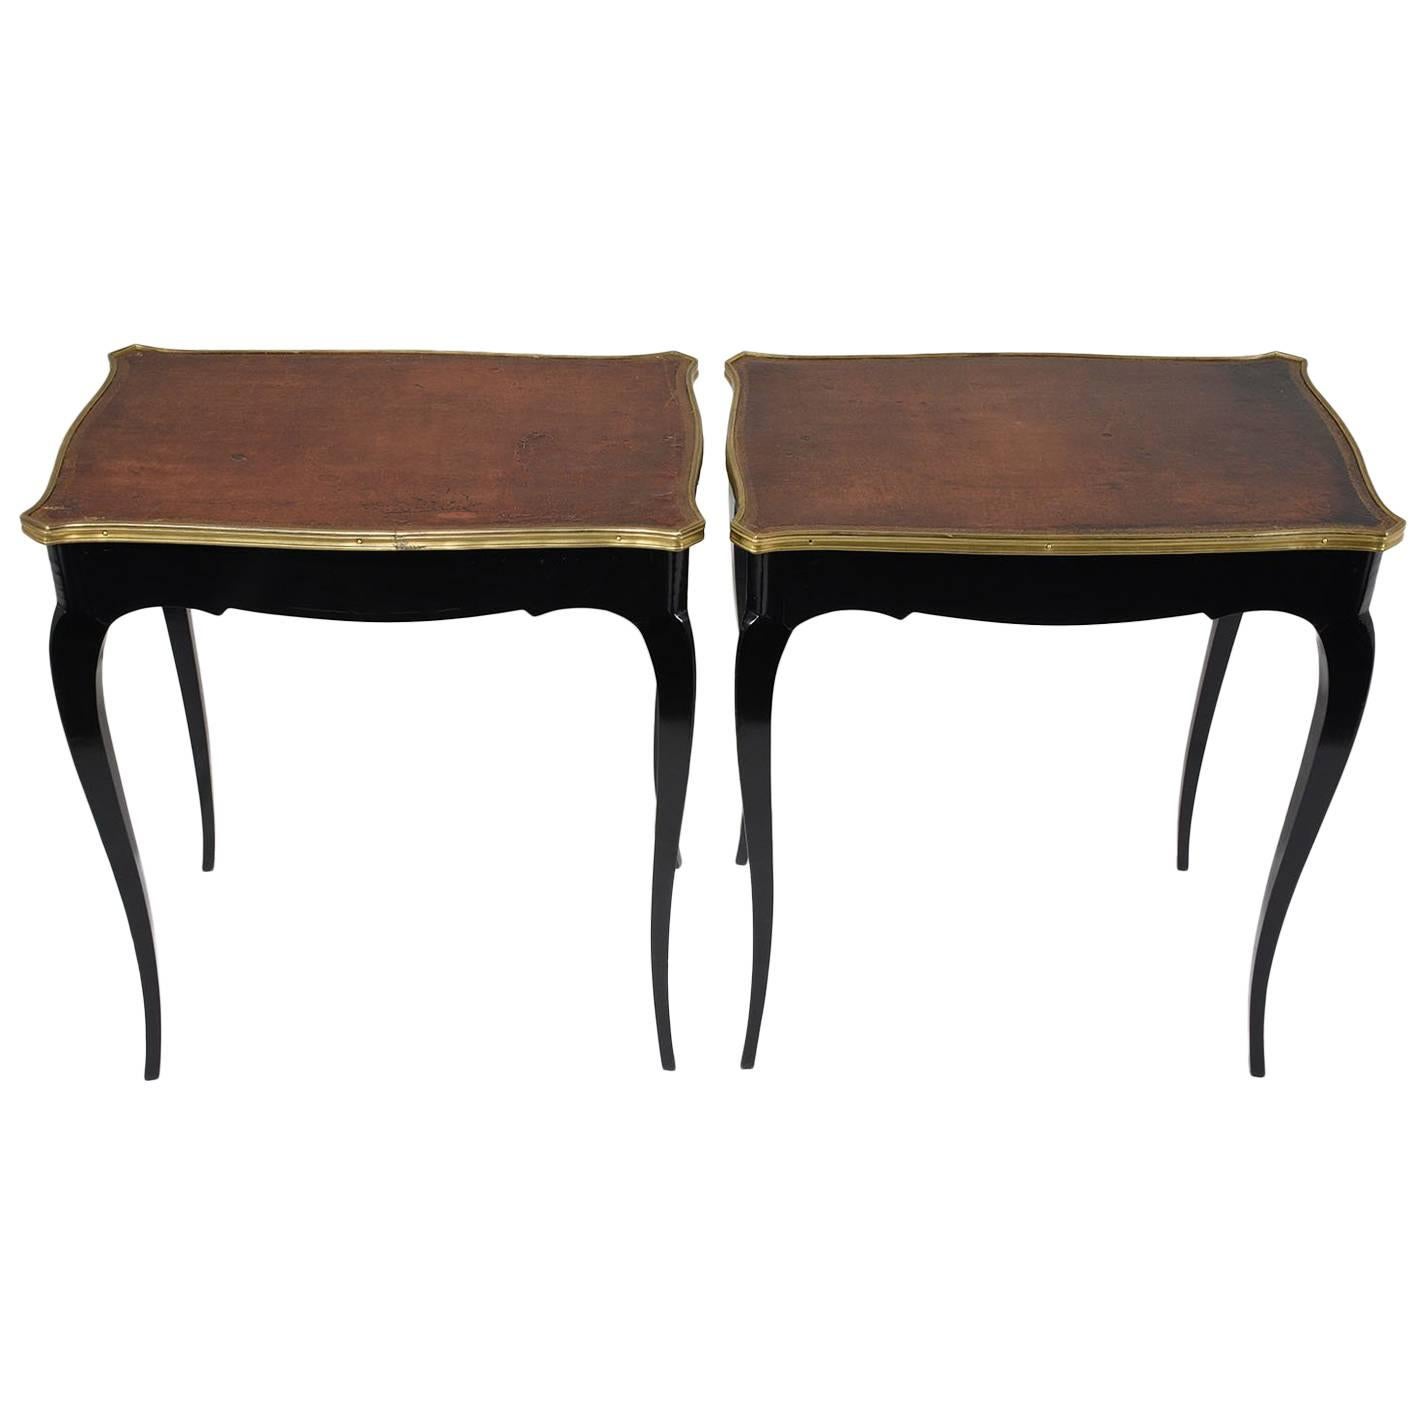 Pair of Antique French Ebonized Louis XV Style Side Tables